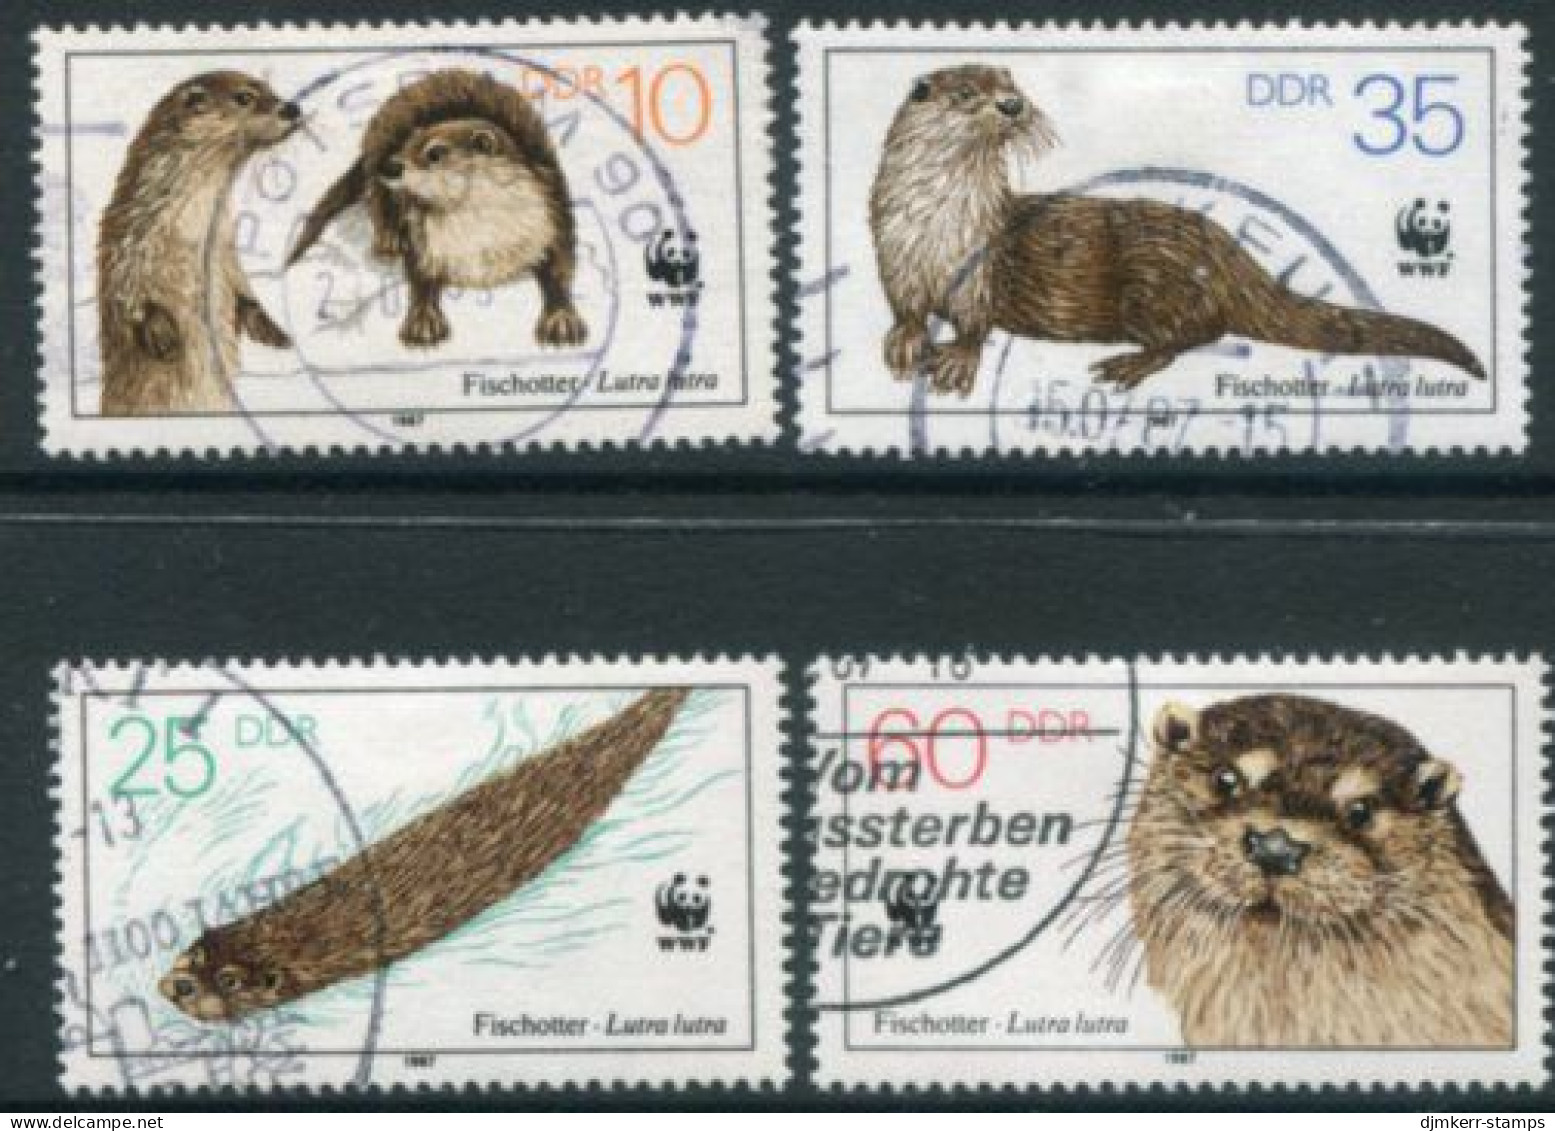 EAST GERMANY / DDR 1987 WWF: Otters Used.  Michel 3107-10 - Used Stamps